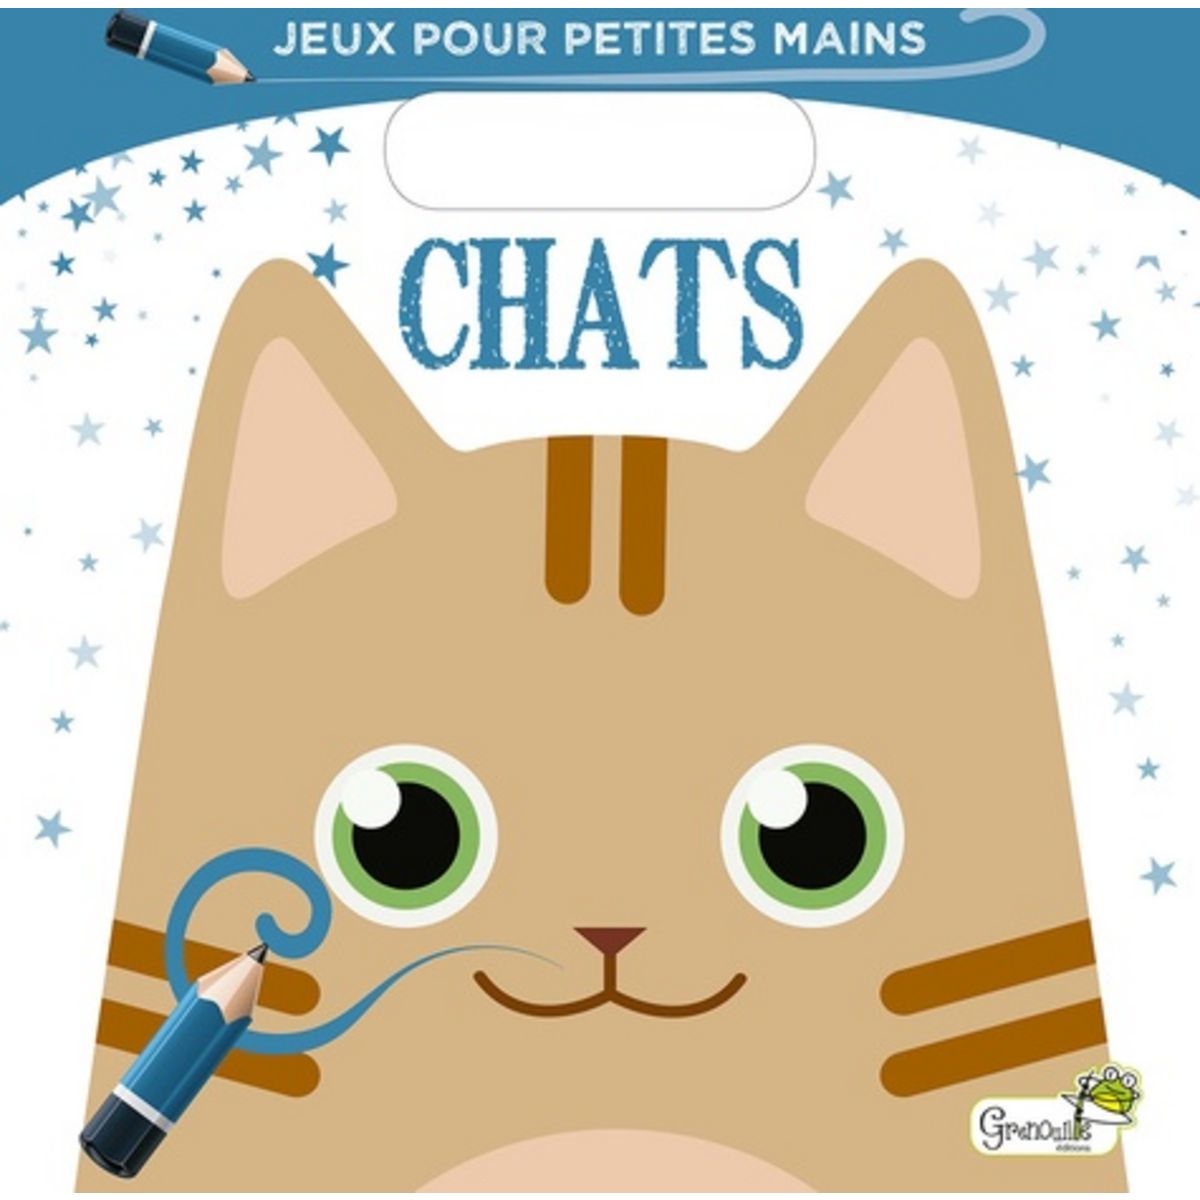  CHATS, Grenouille éditions